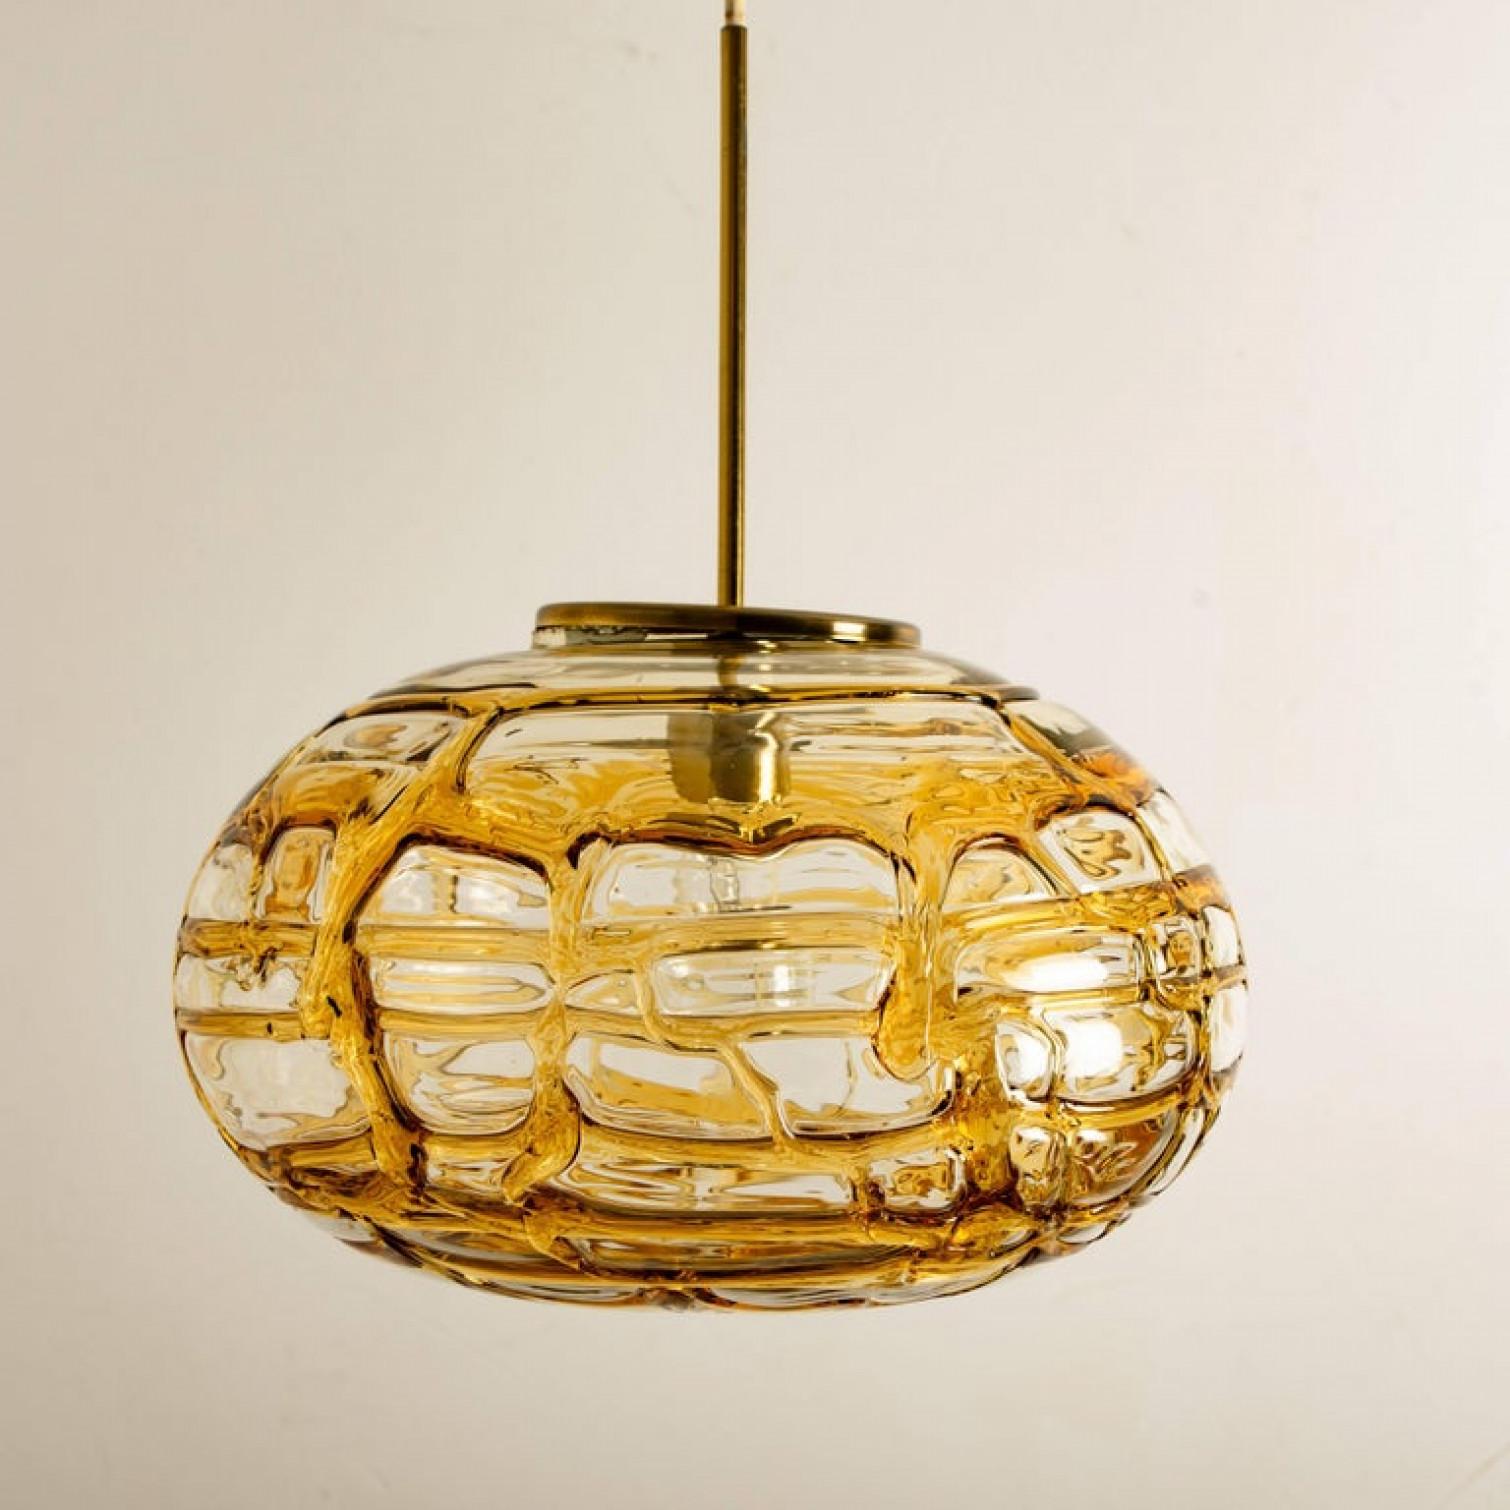 Pair of Amber Murano Glass Pendant Lamp, 1960s For Sale 3